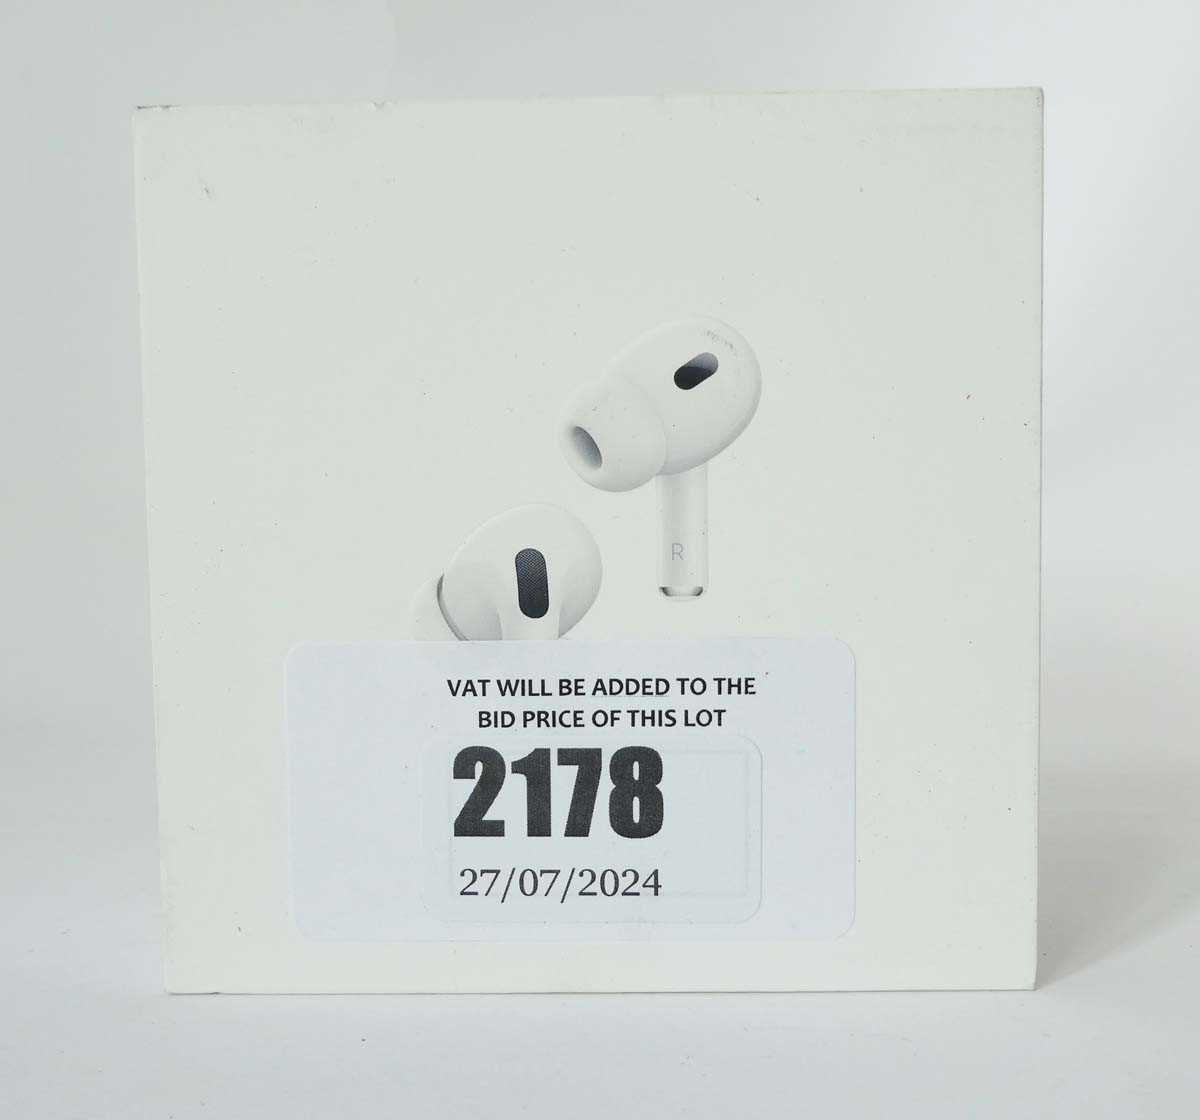 Lot 2178 - *Sealed* AirPods Pro 2nd Gen